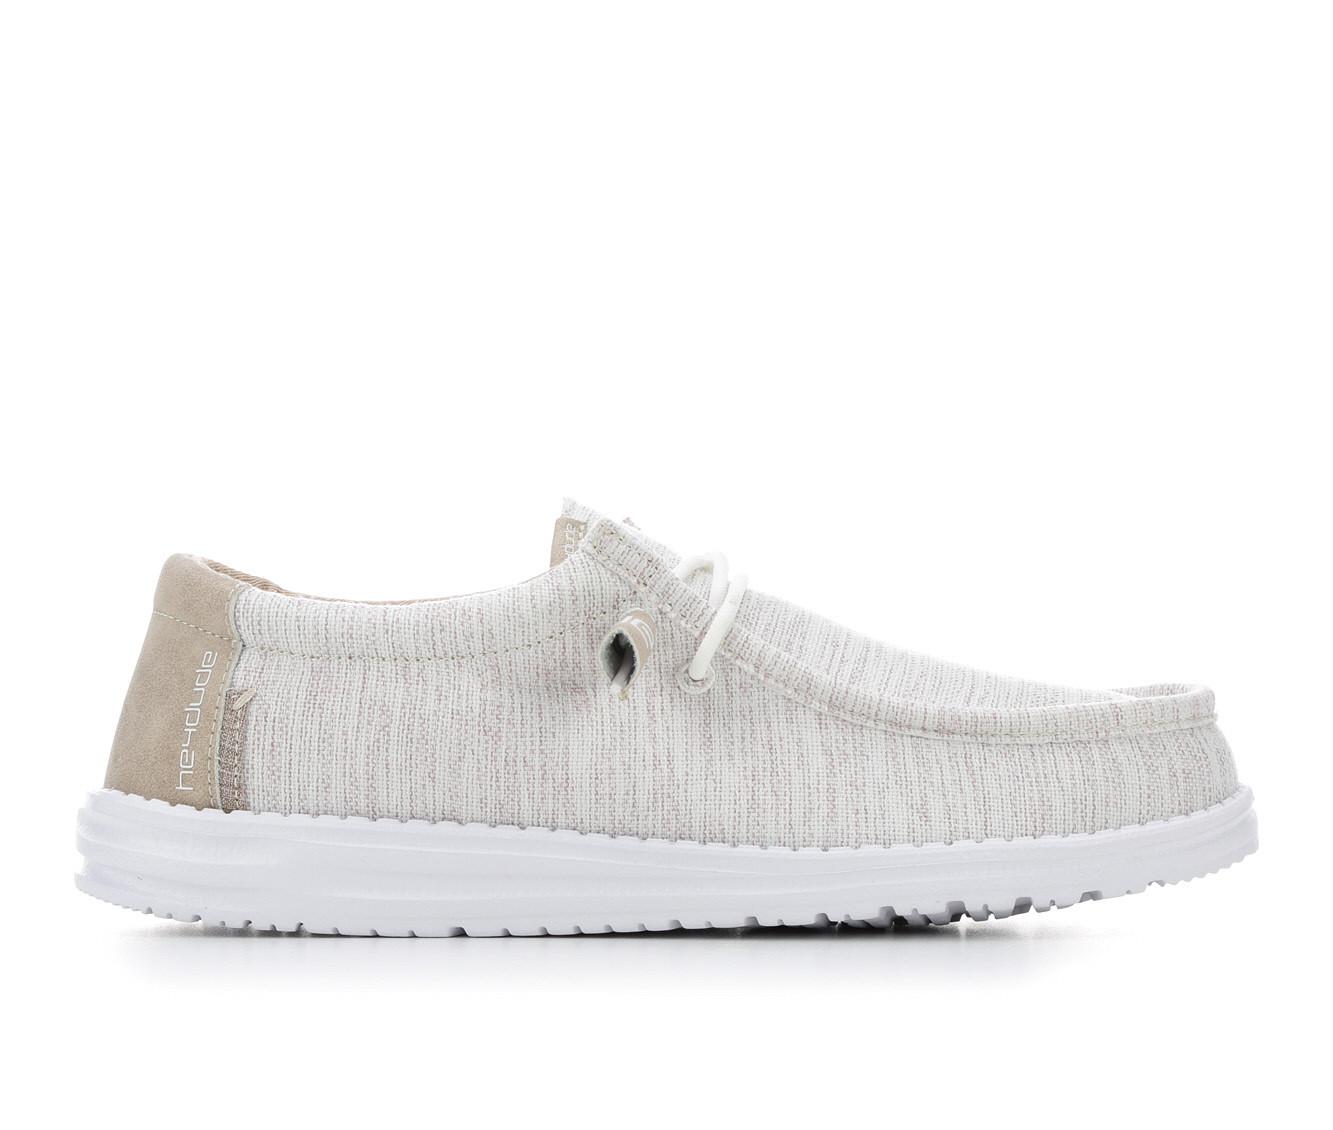 Men's HEYDUDE Wally Ascend Woven Slip-On Shoes